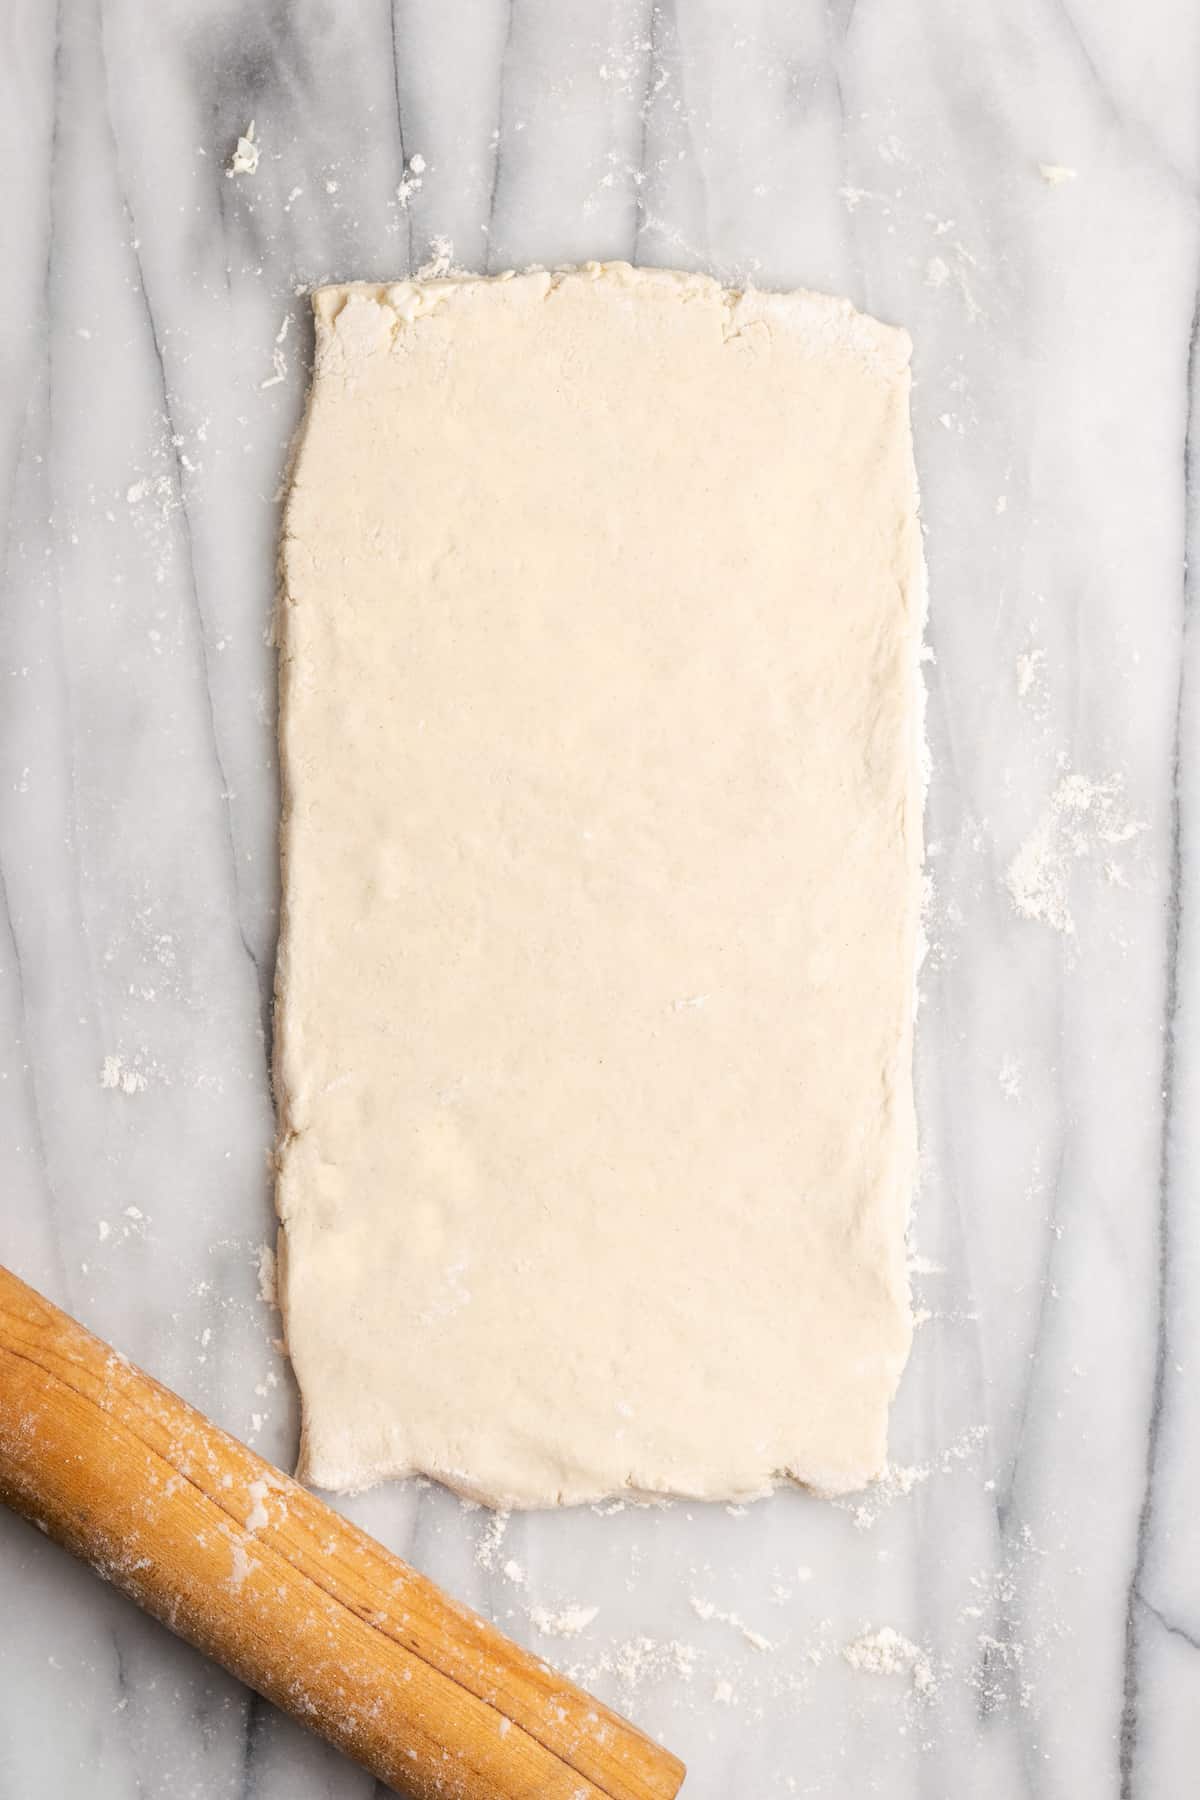 A slightly thick rectangle of dough rolled out next to a rolling pin